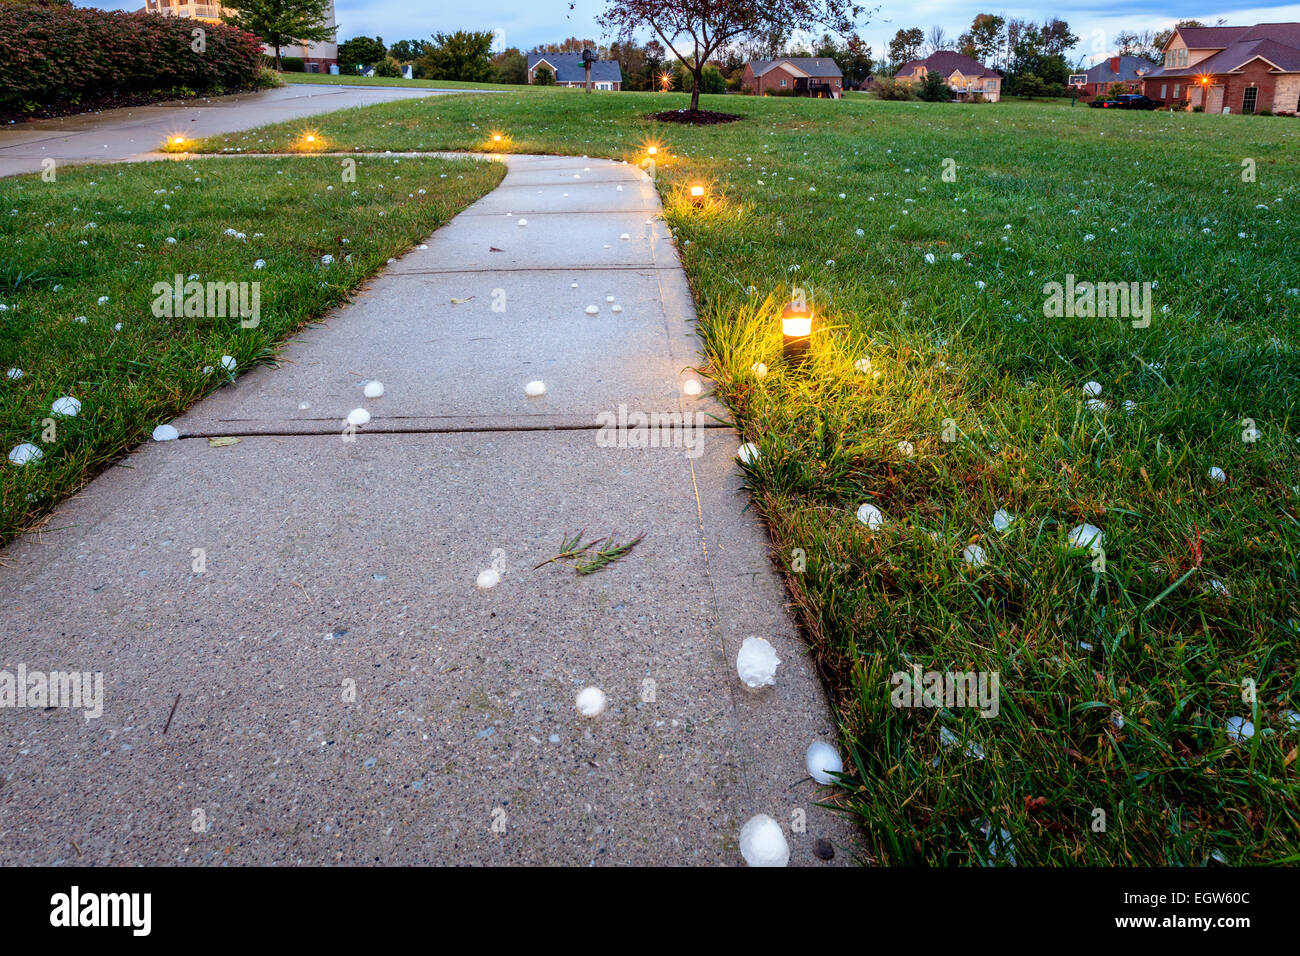 Baseball size hail covering the ground after the storm in Georgetown, Kentucky Stock Photo